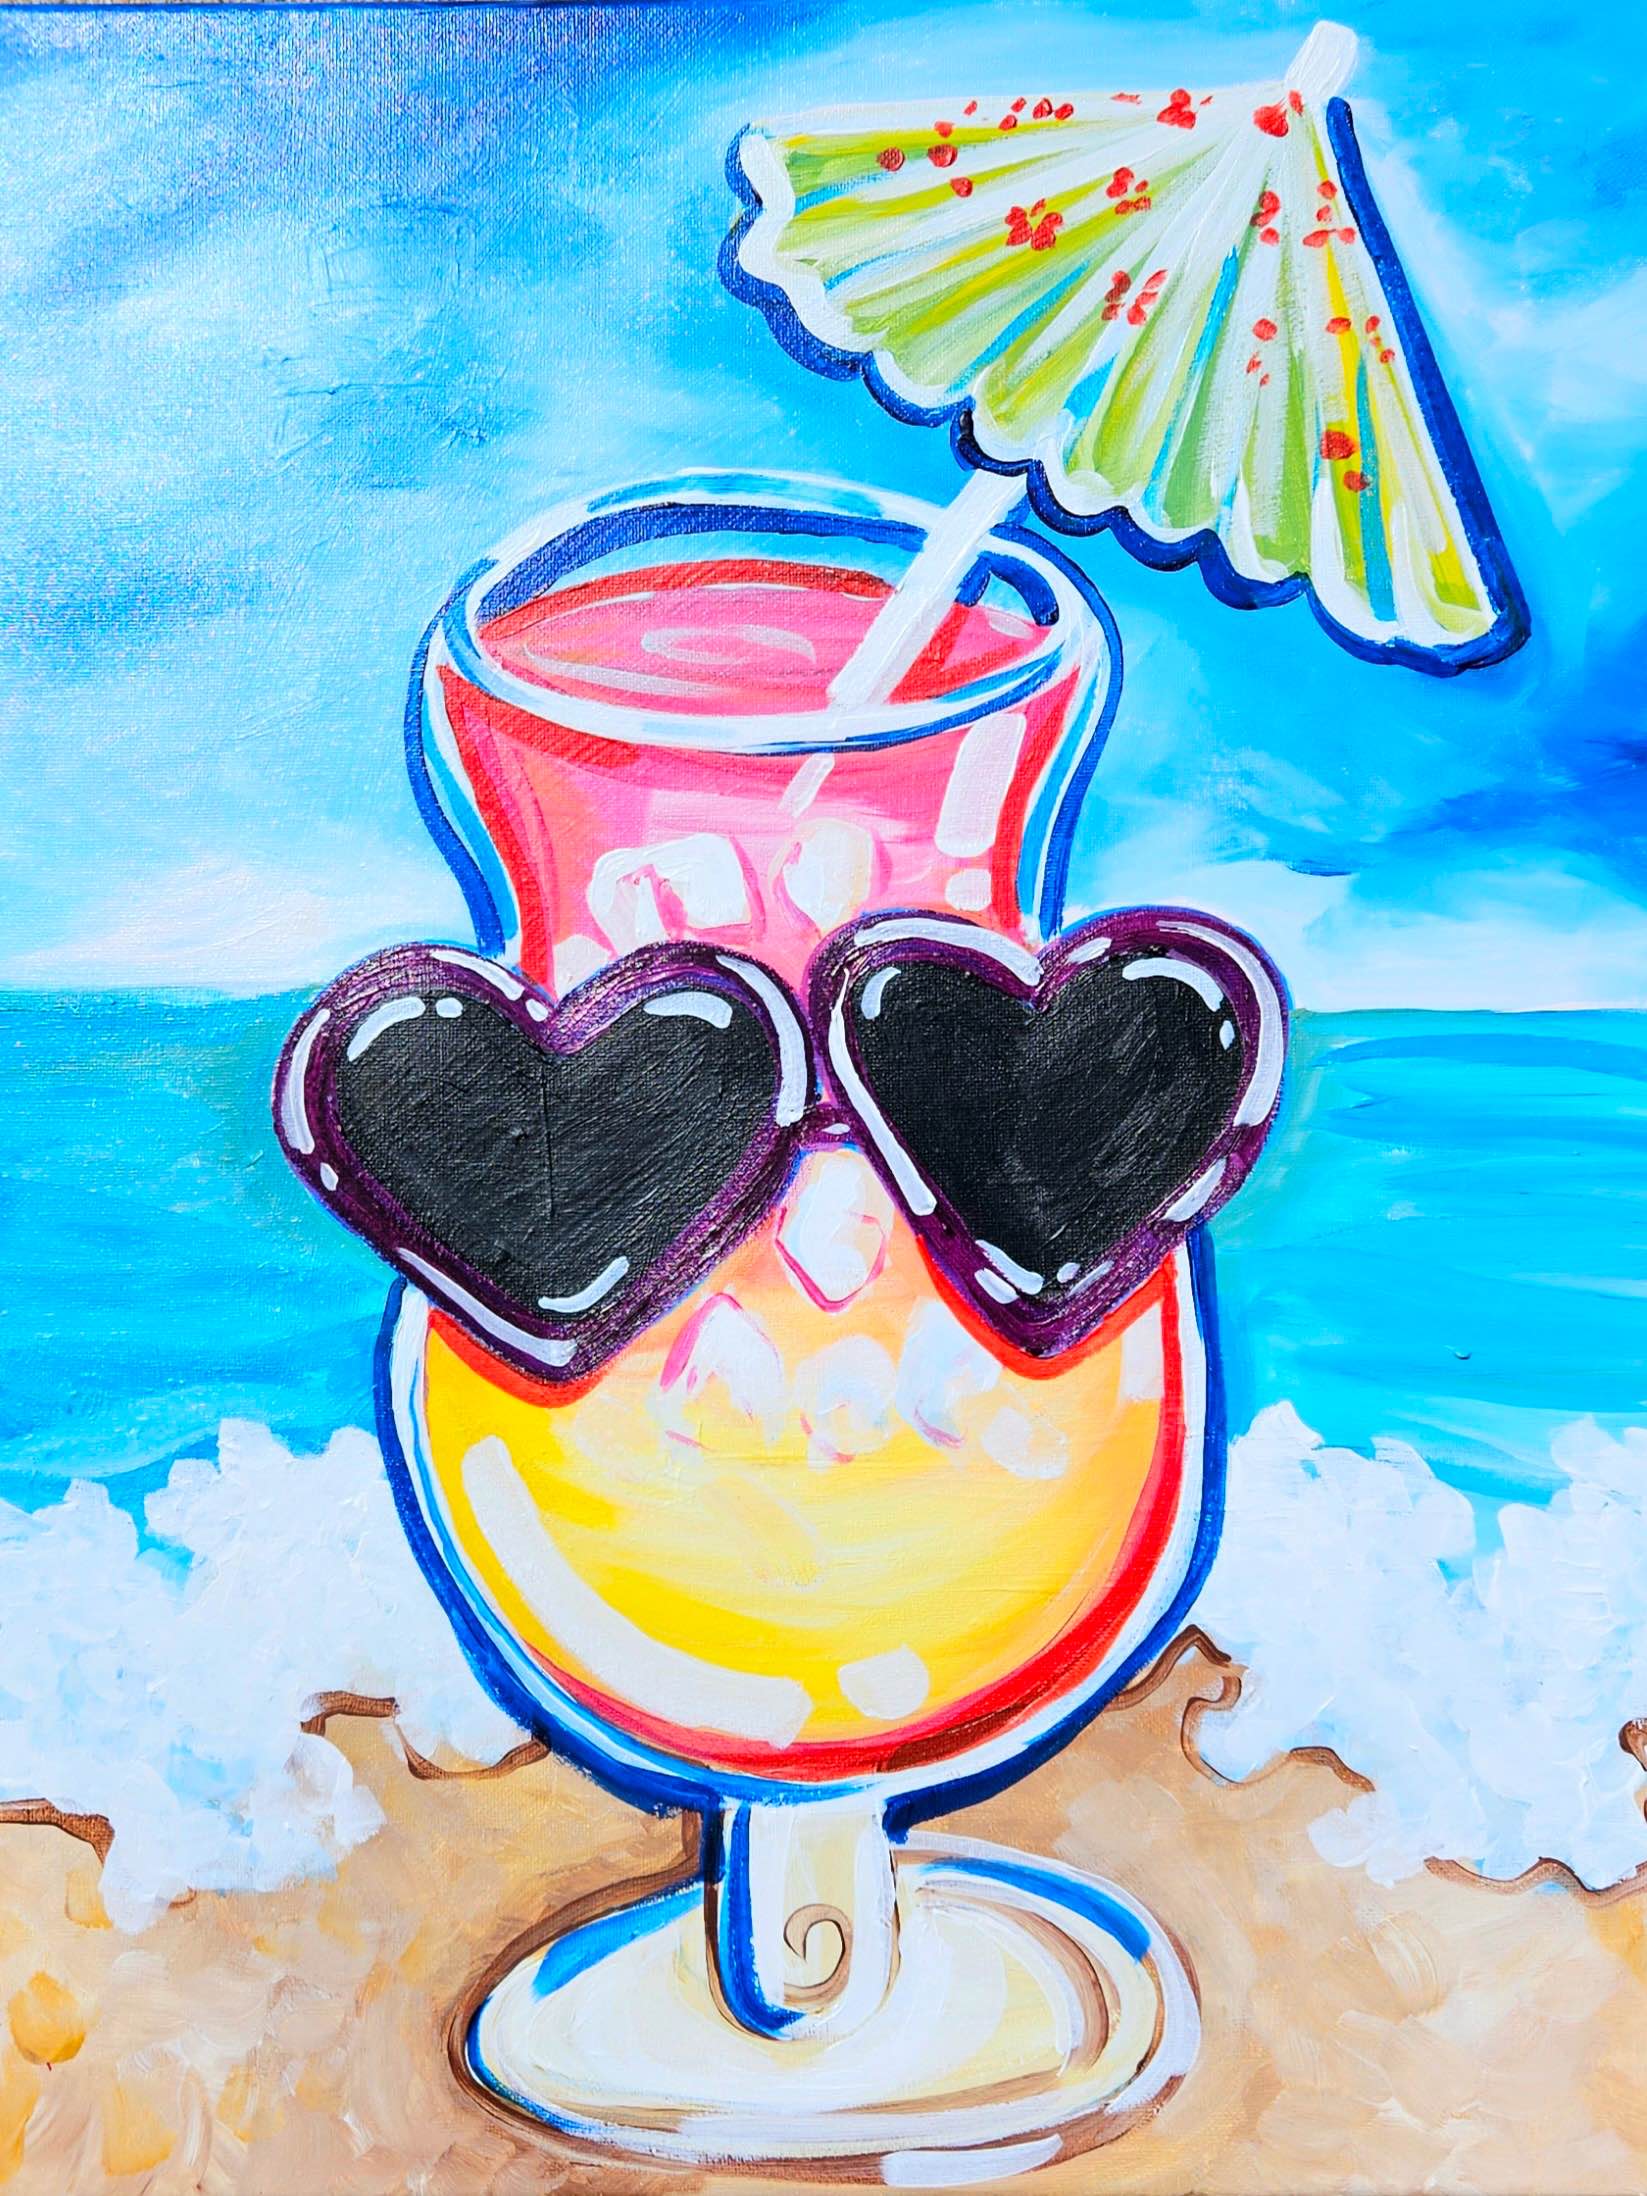 It's Always Happy Hour at the Beach!